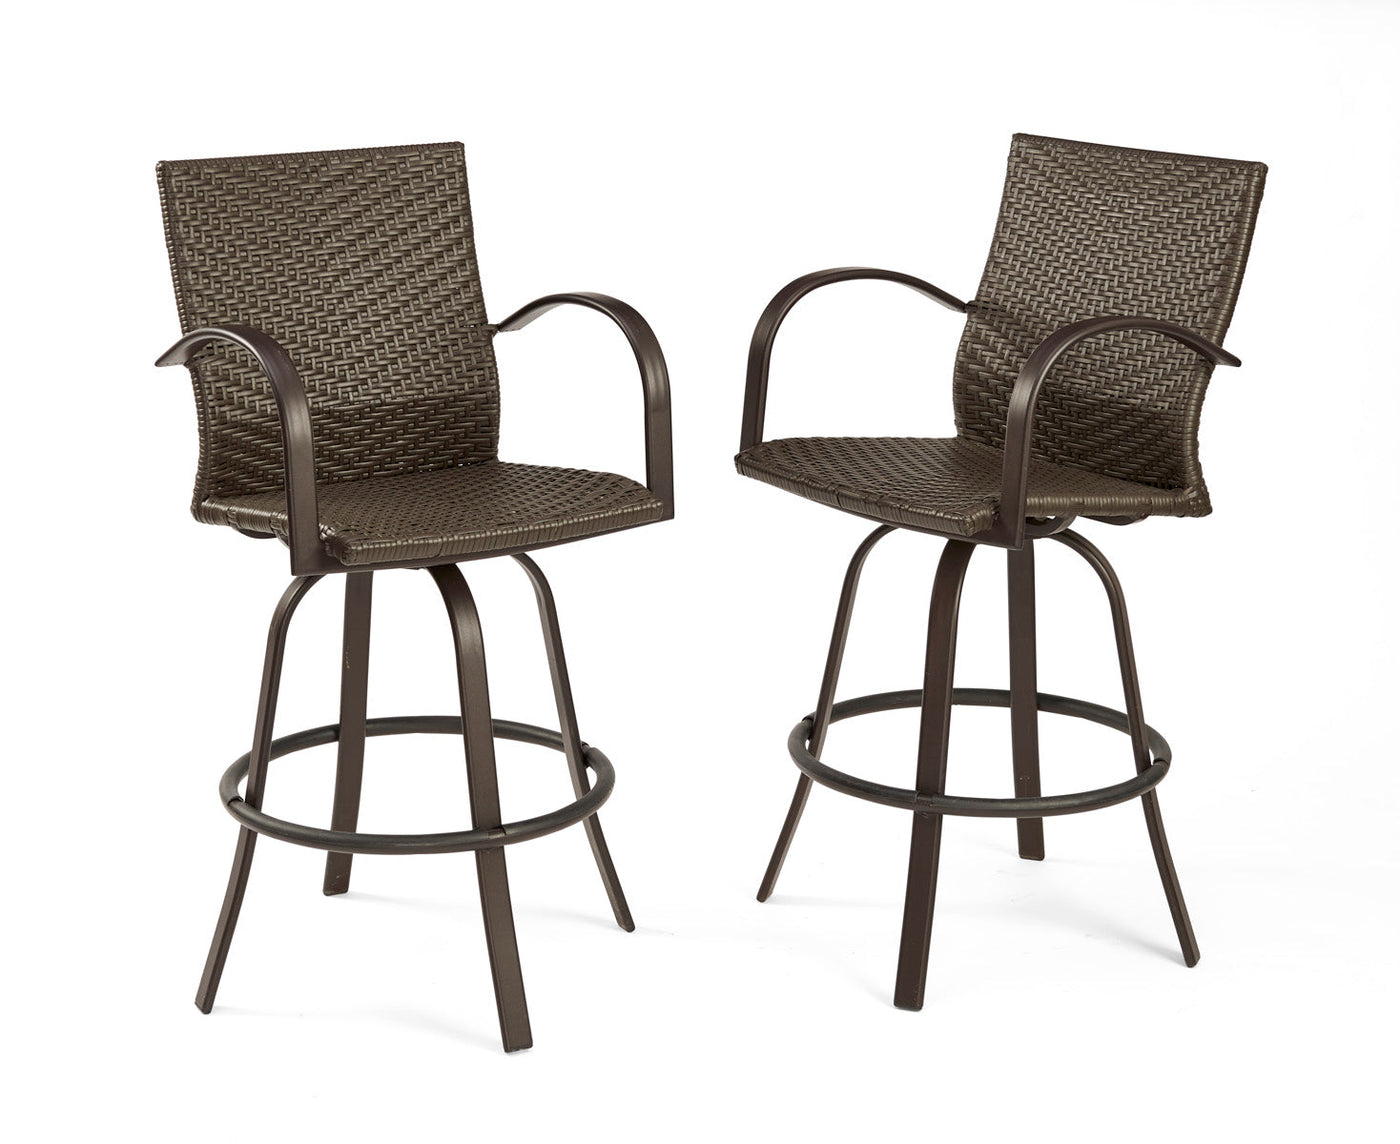 The Outdoor GreatRoom Company Leather Wicker Bar Stools